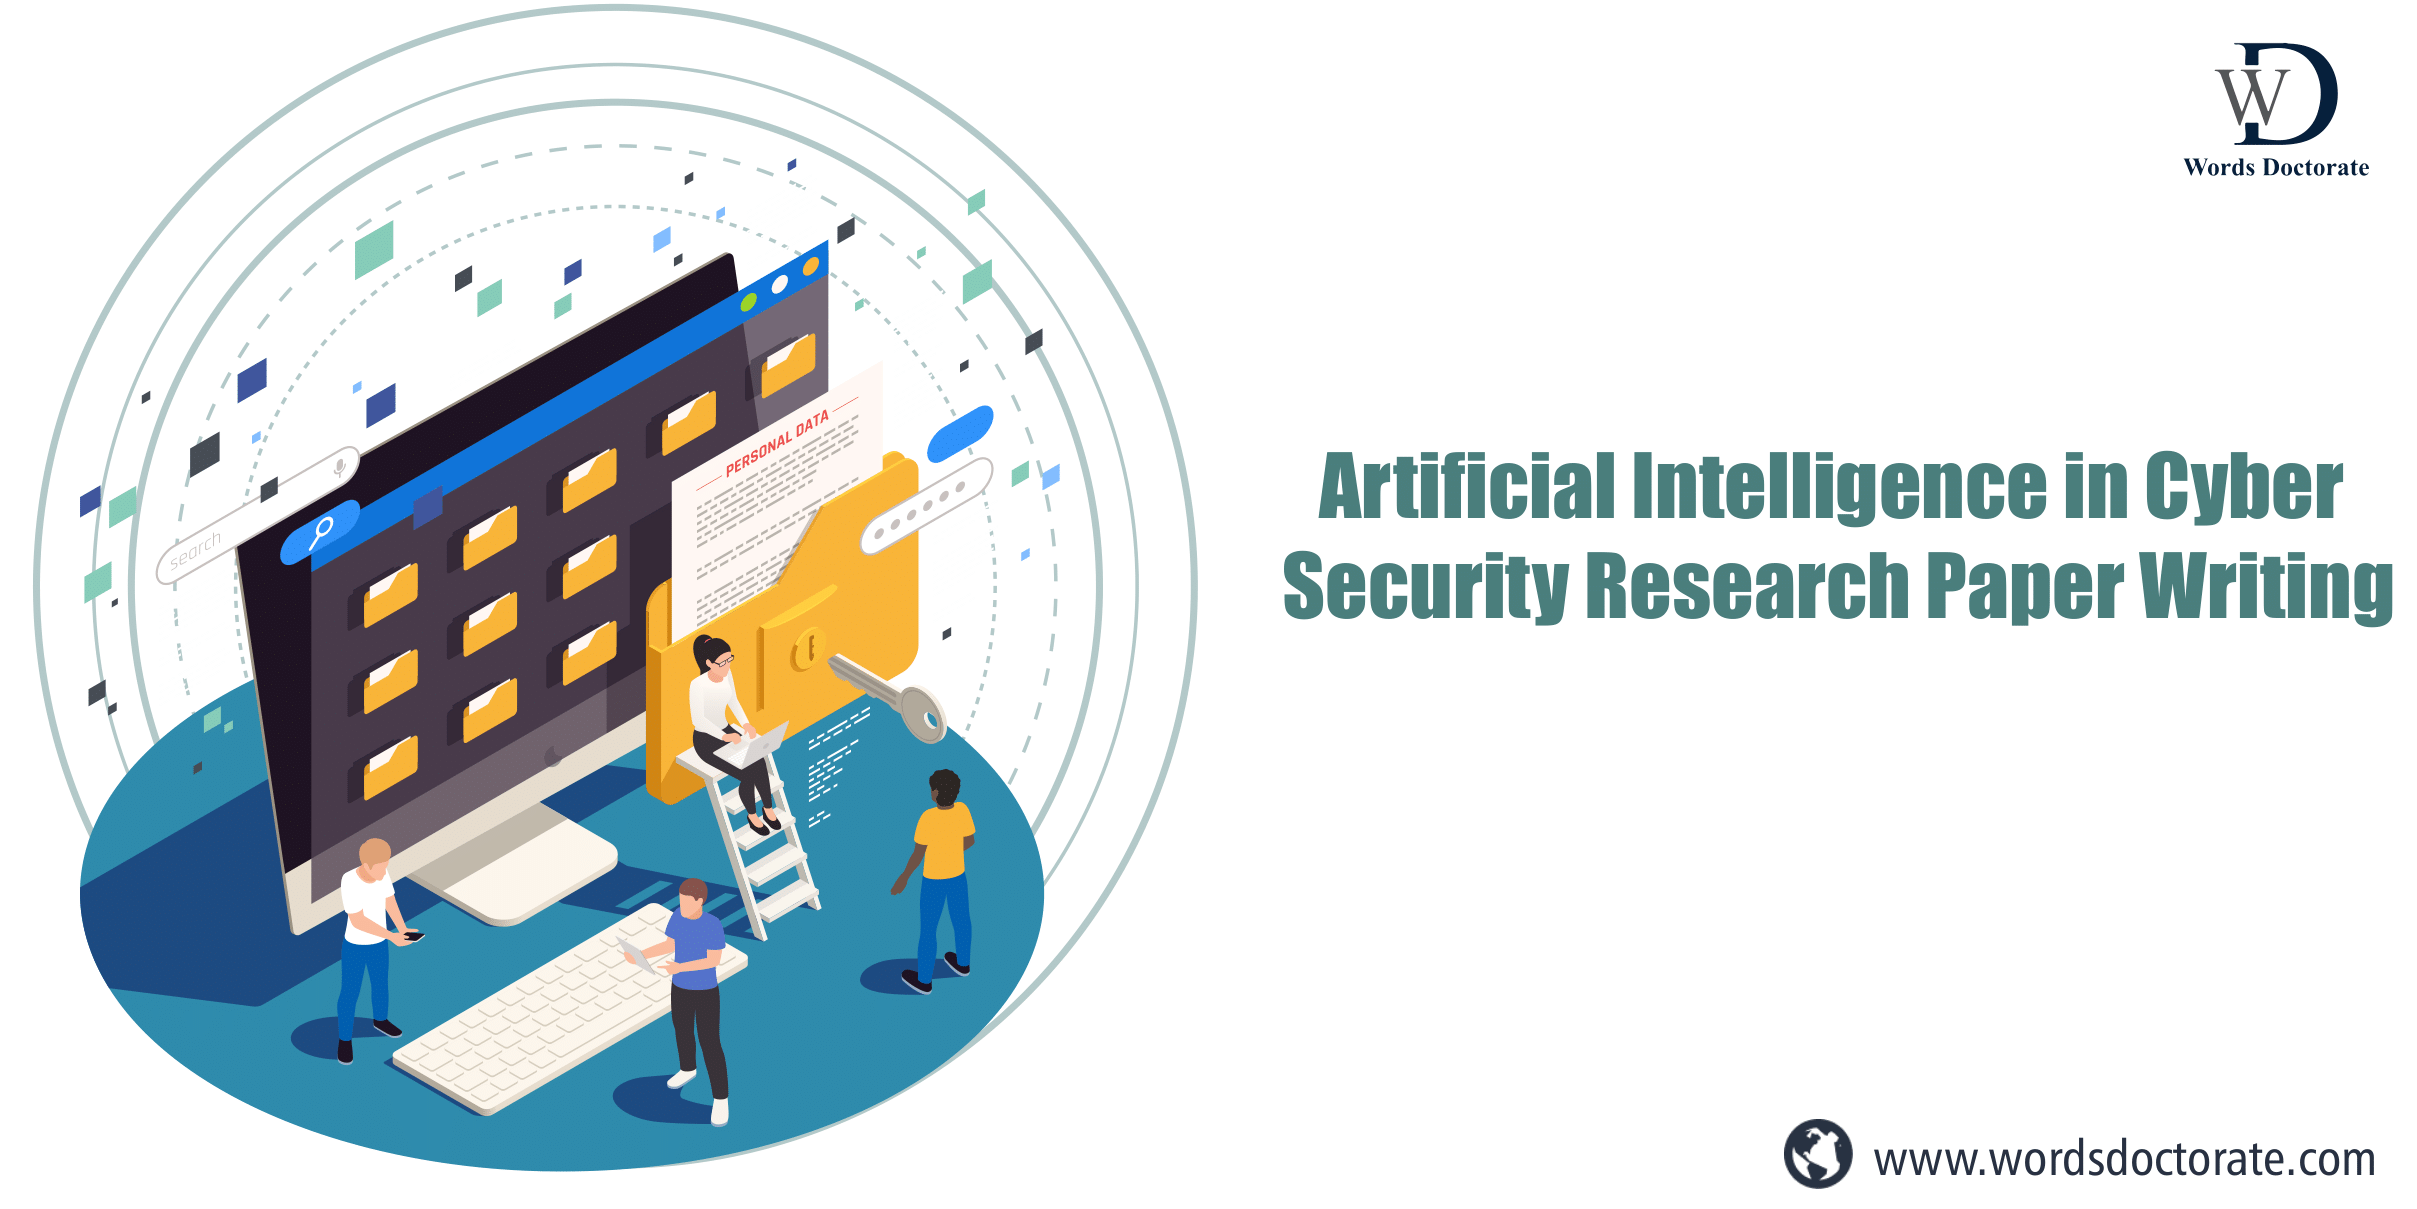 Artificial Intelligence in Cyber Security Research Paper Writing